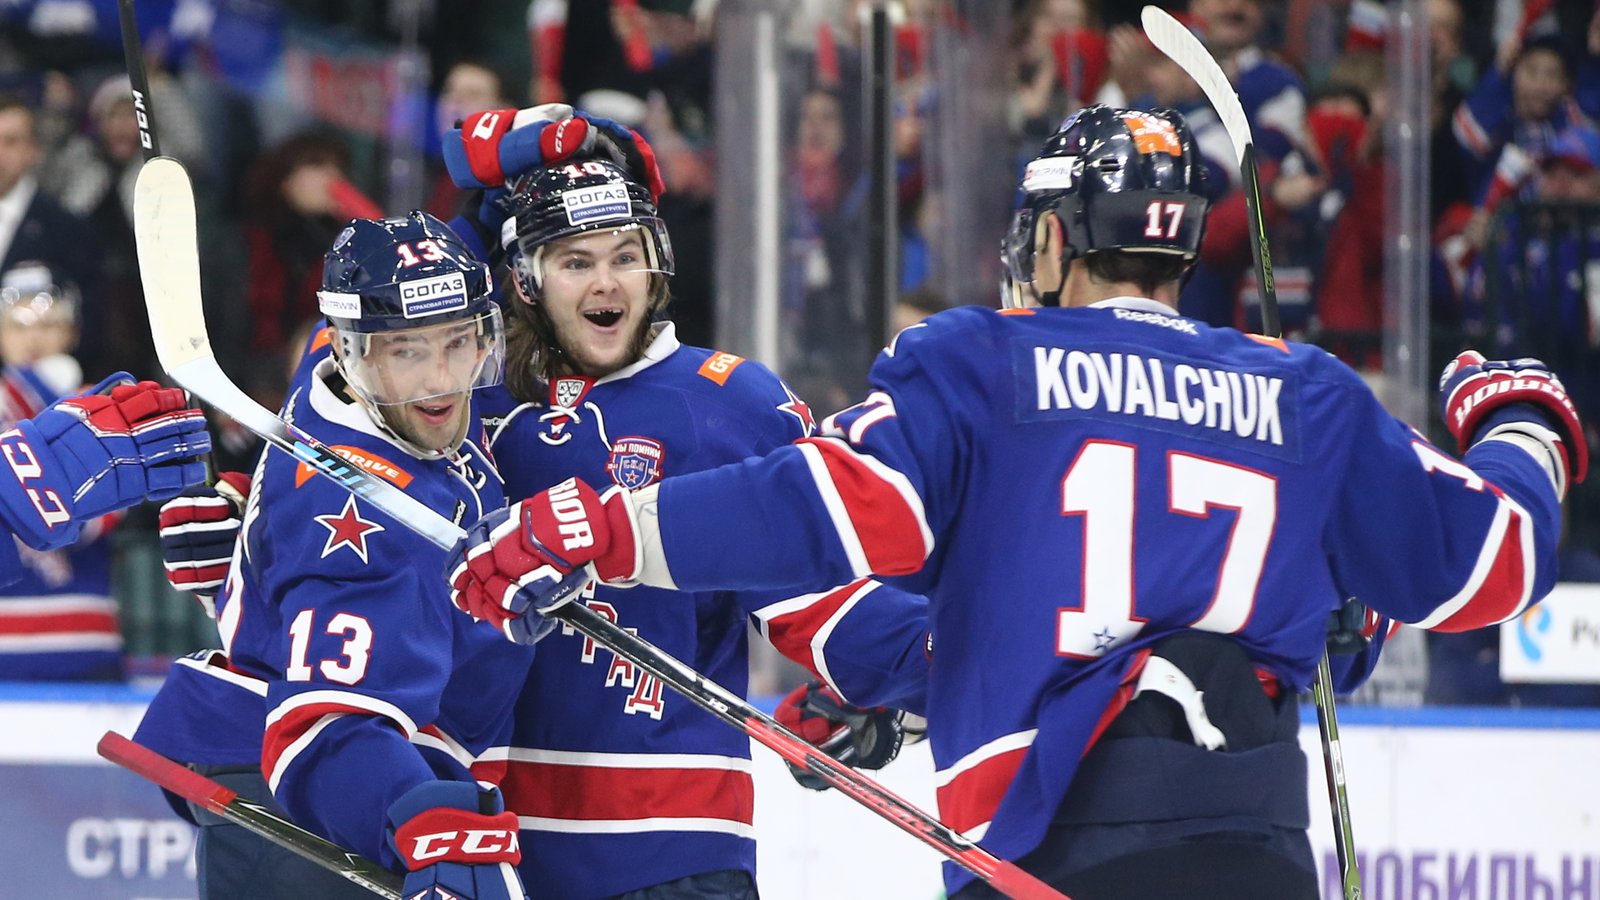 Russian powerhouse team continues to tear up KHL